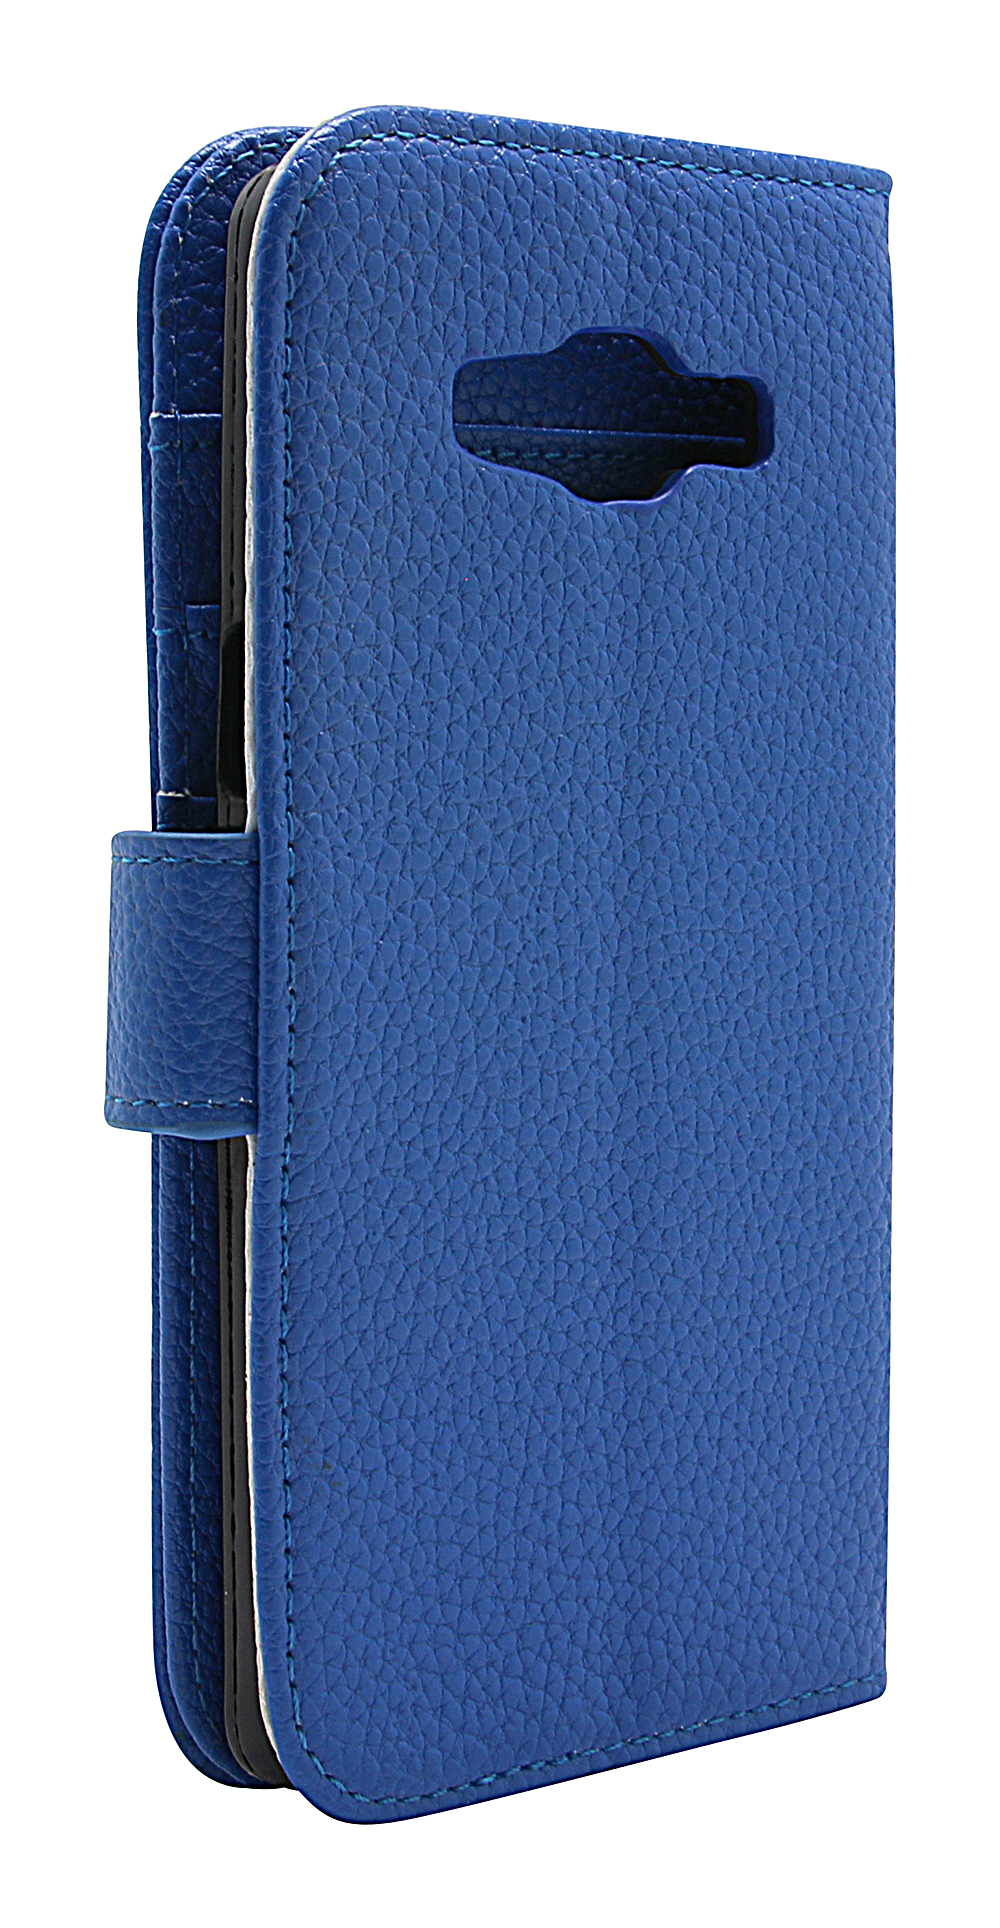 New Standcase Wallet Samsung Galaxy A5 (SM-A500F)